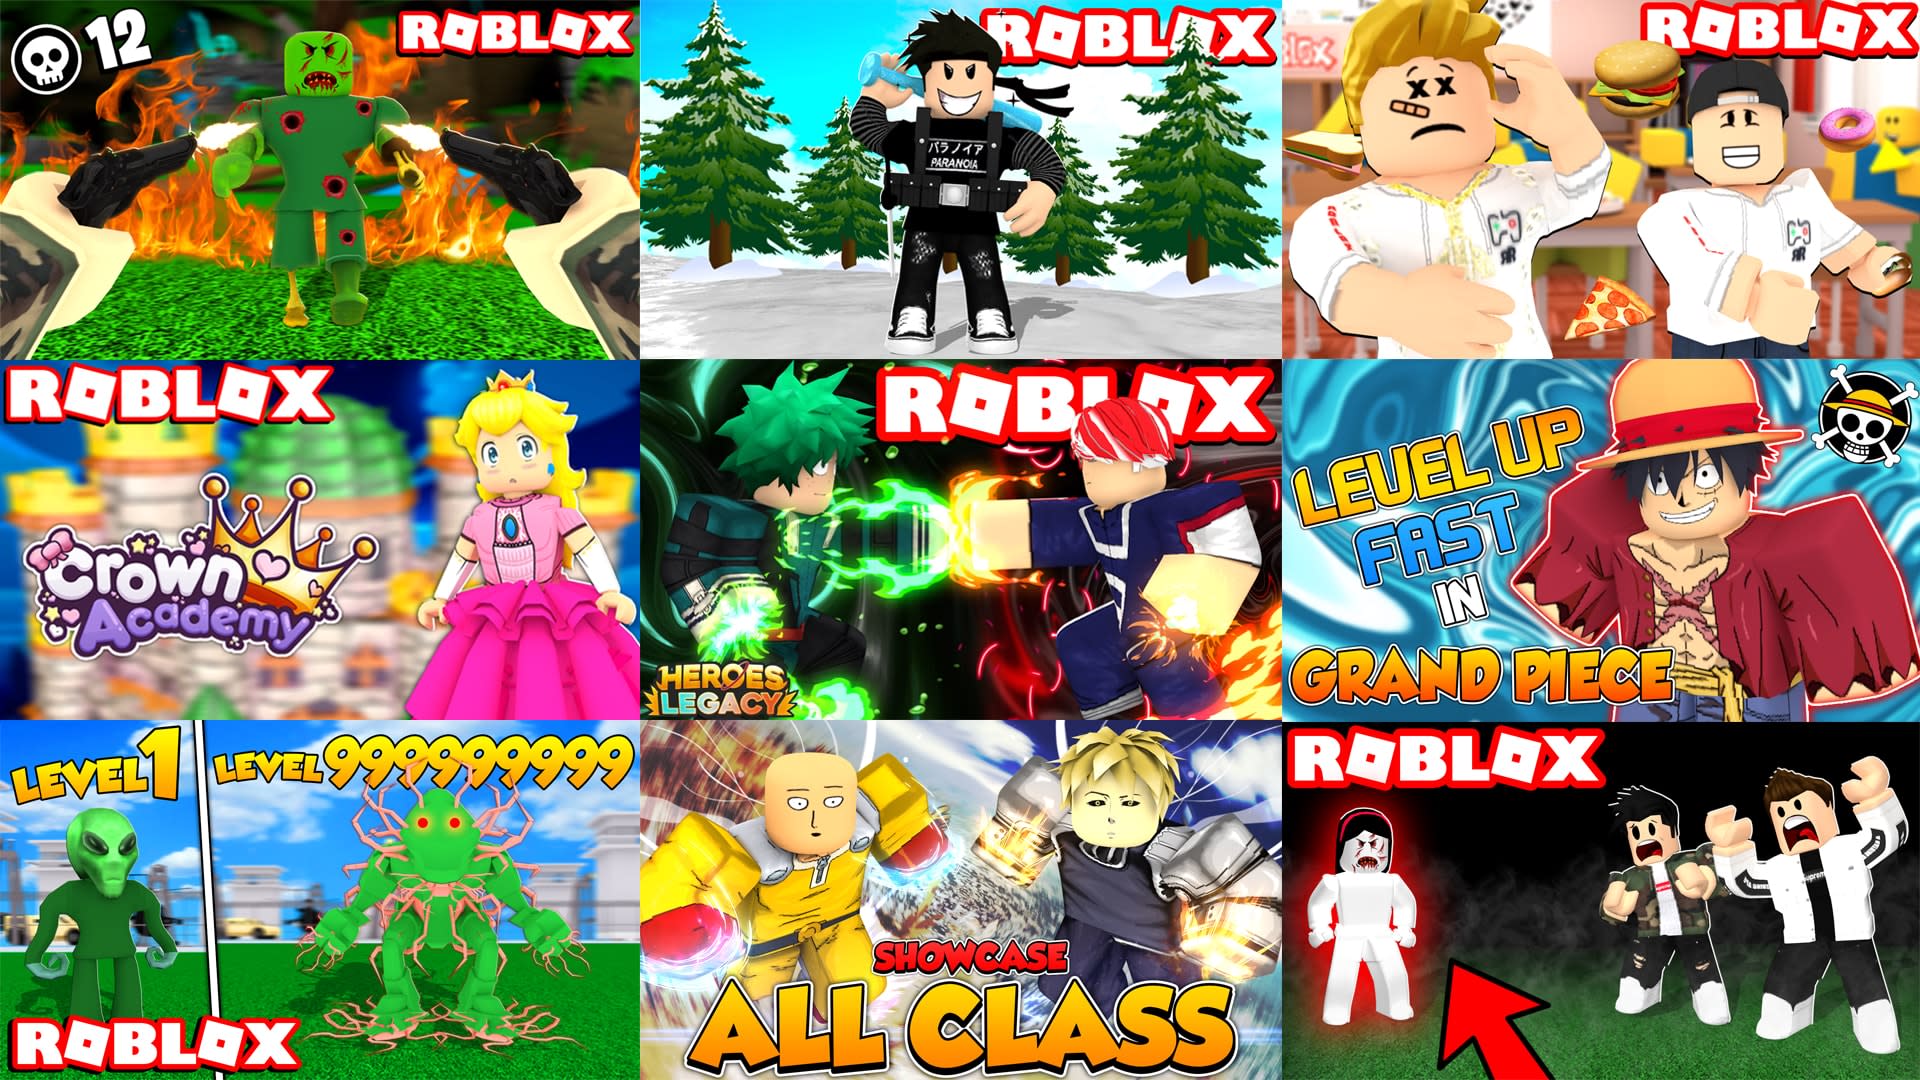 Make You A Professional Hd Roblox Thumbnail Or Gfx By Ovibosd Fiverr - best thumbnails for robbery games in roblox